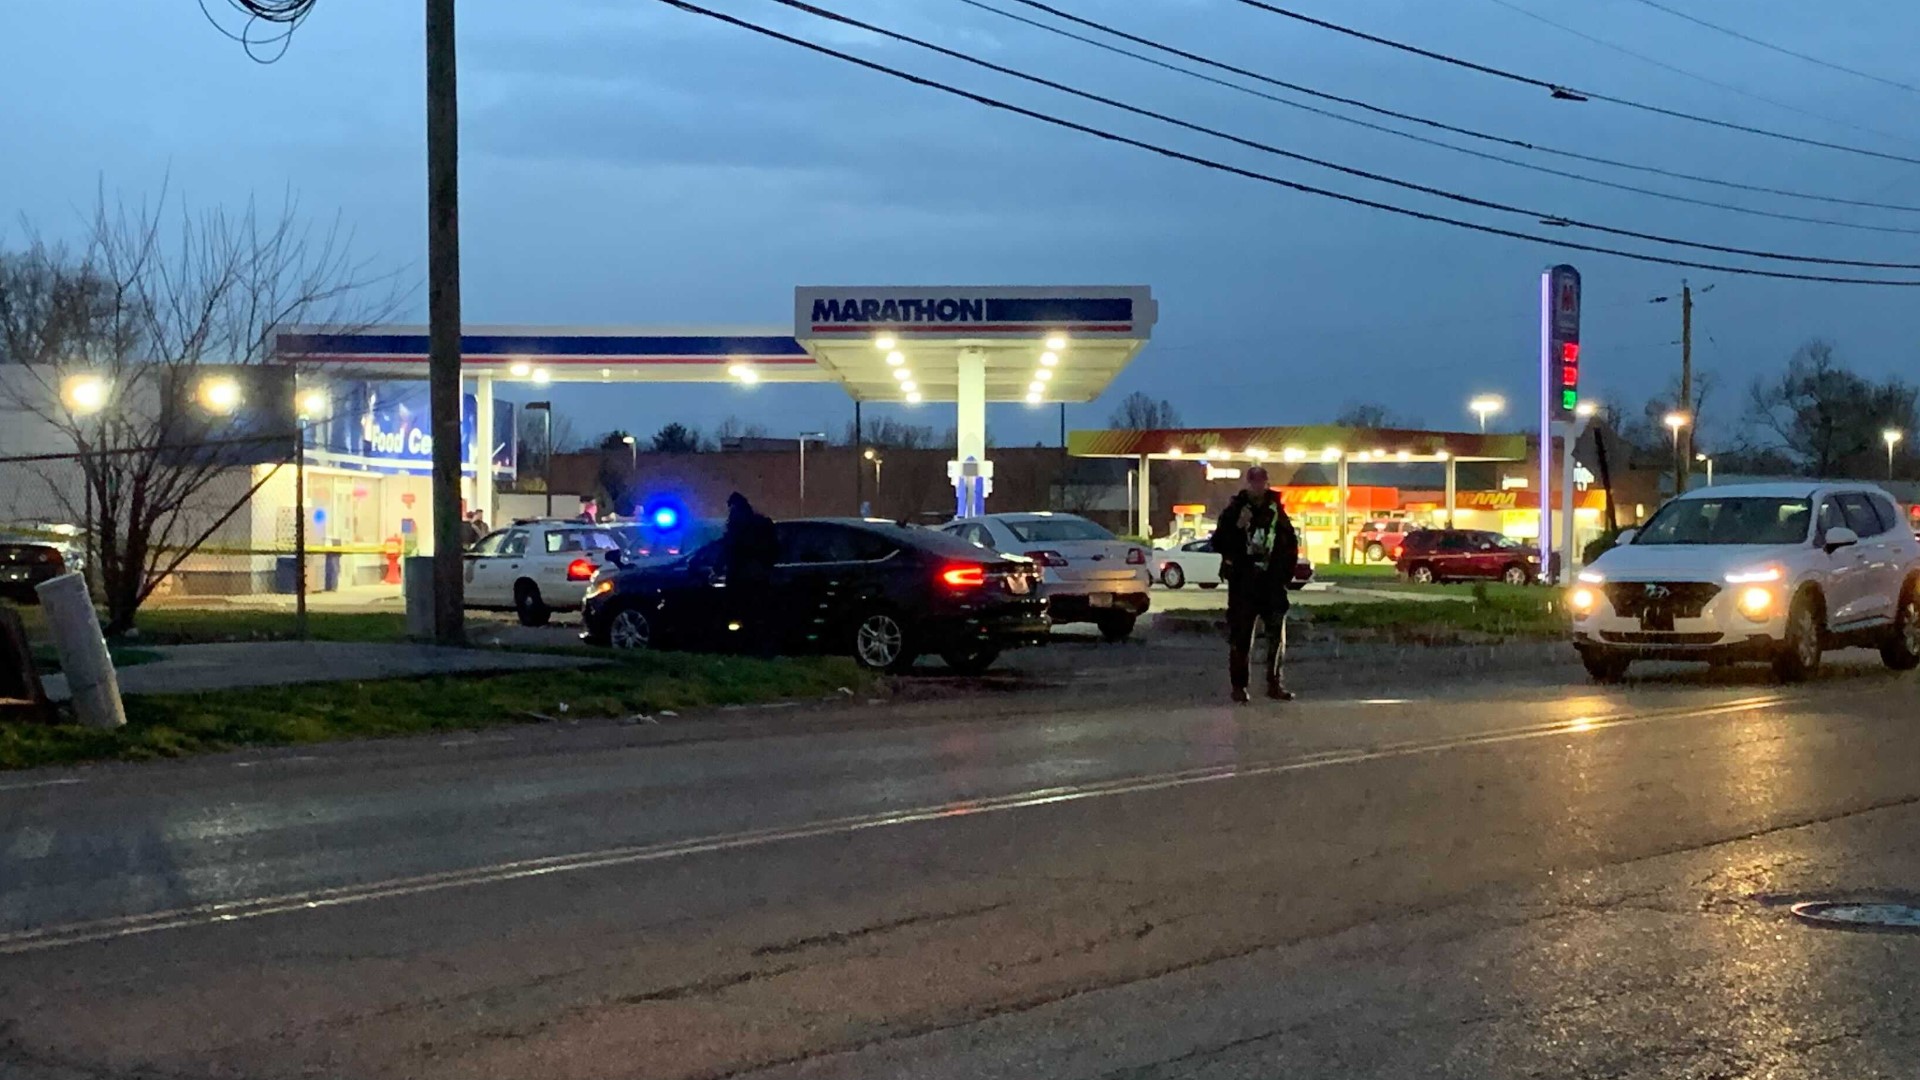 The shooting reportedly happened at a Marathon gas station at West 71st Street and Georgetown Road.